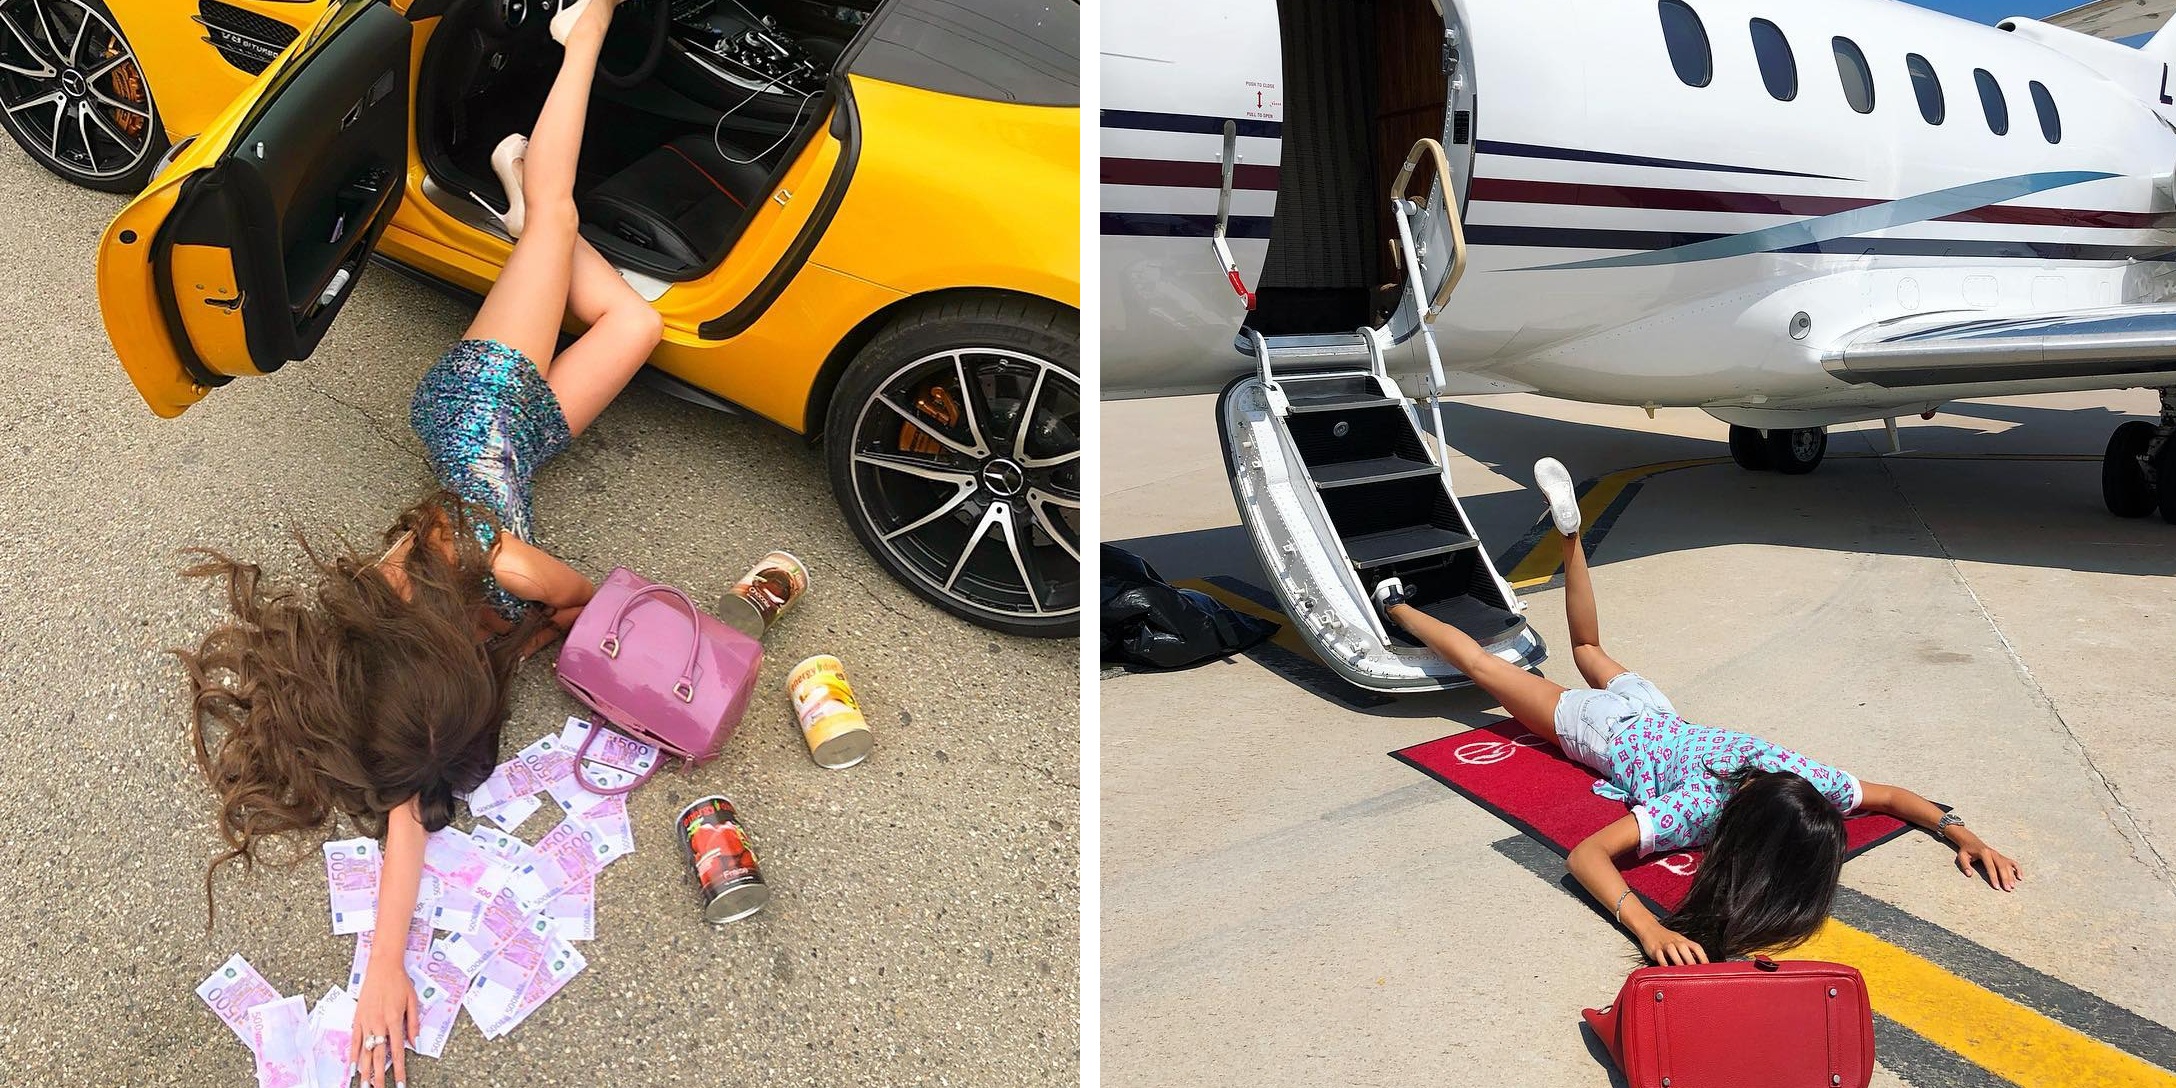 In New Viral “Challenge” People Fall Over Cash and Luxury Items To Flaunt Their Wealth!